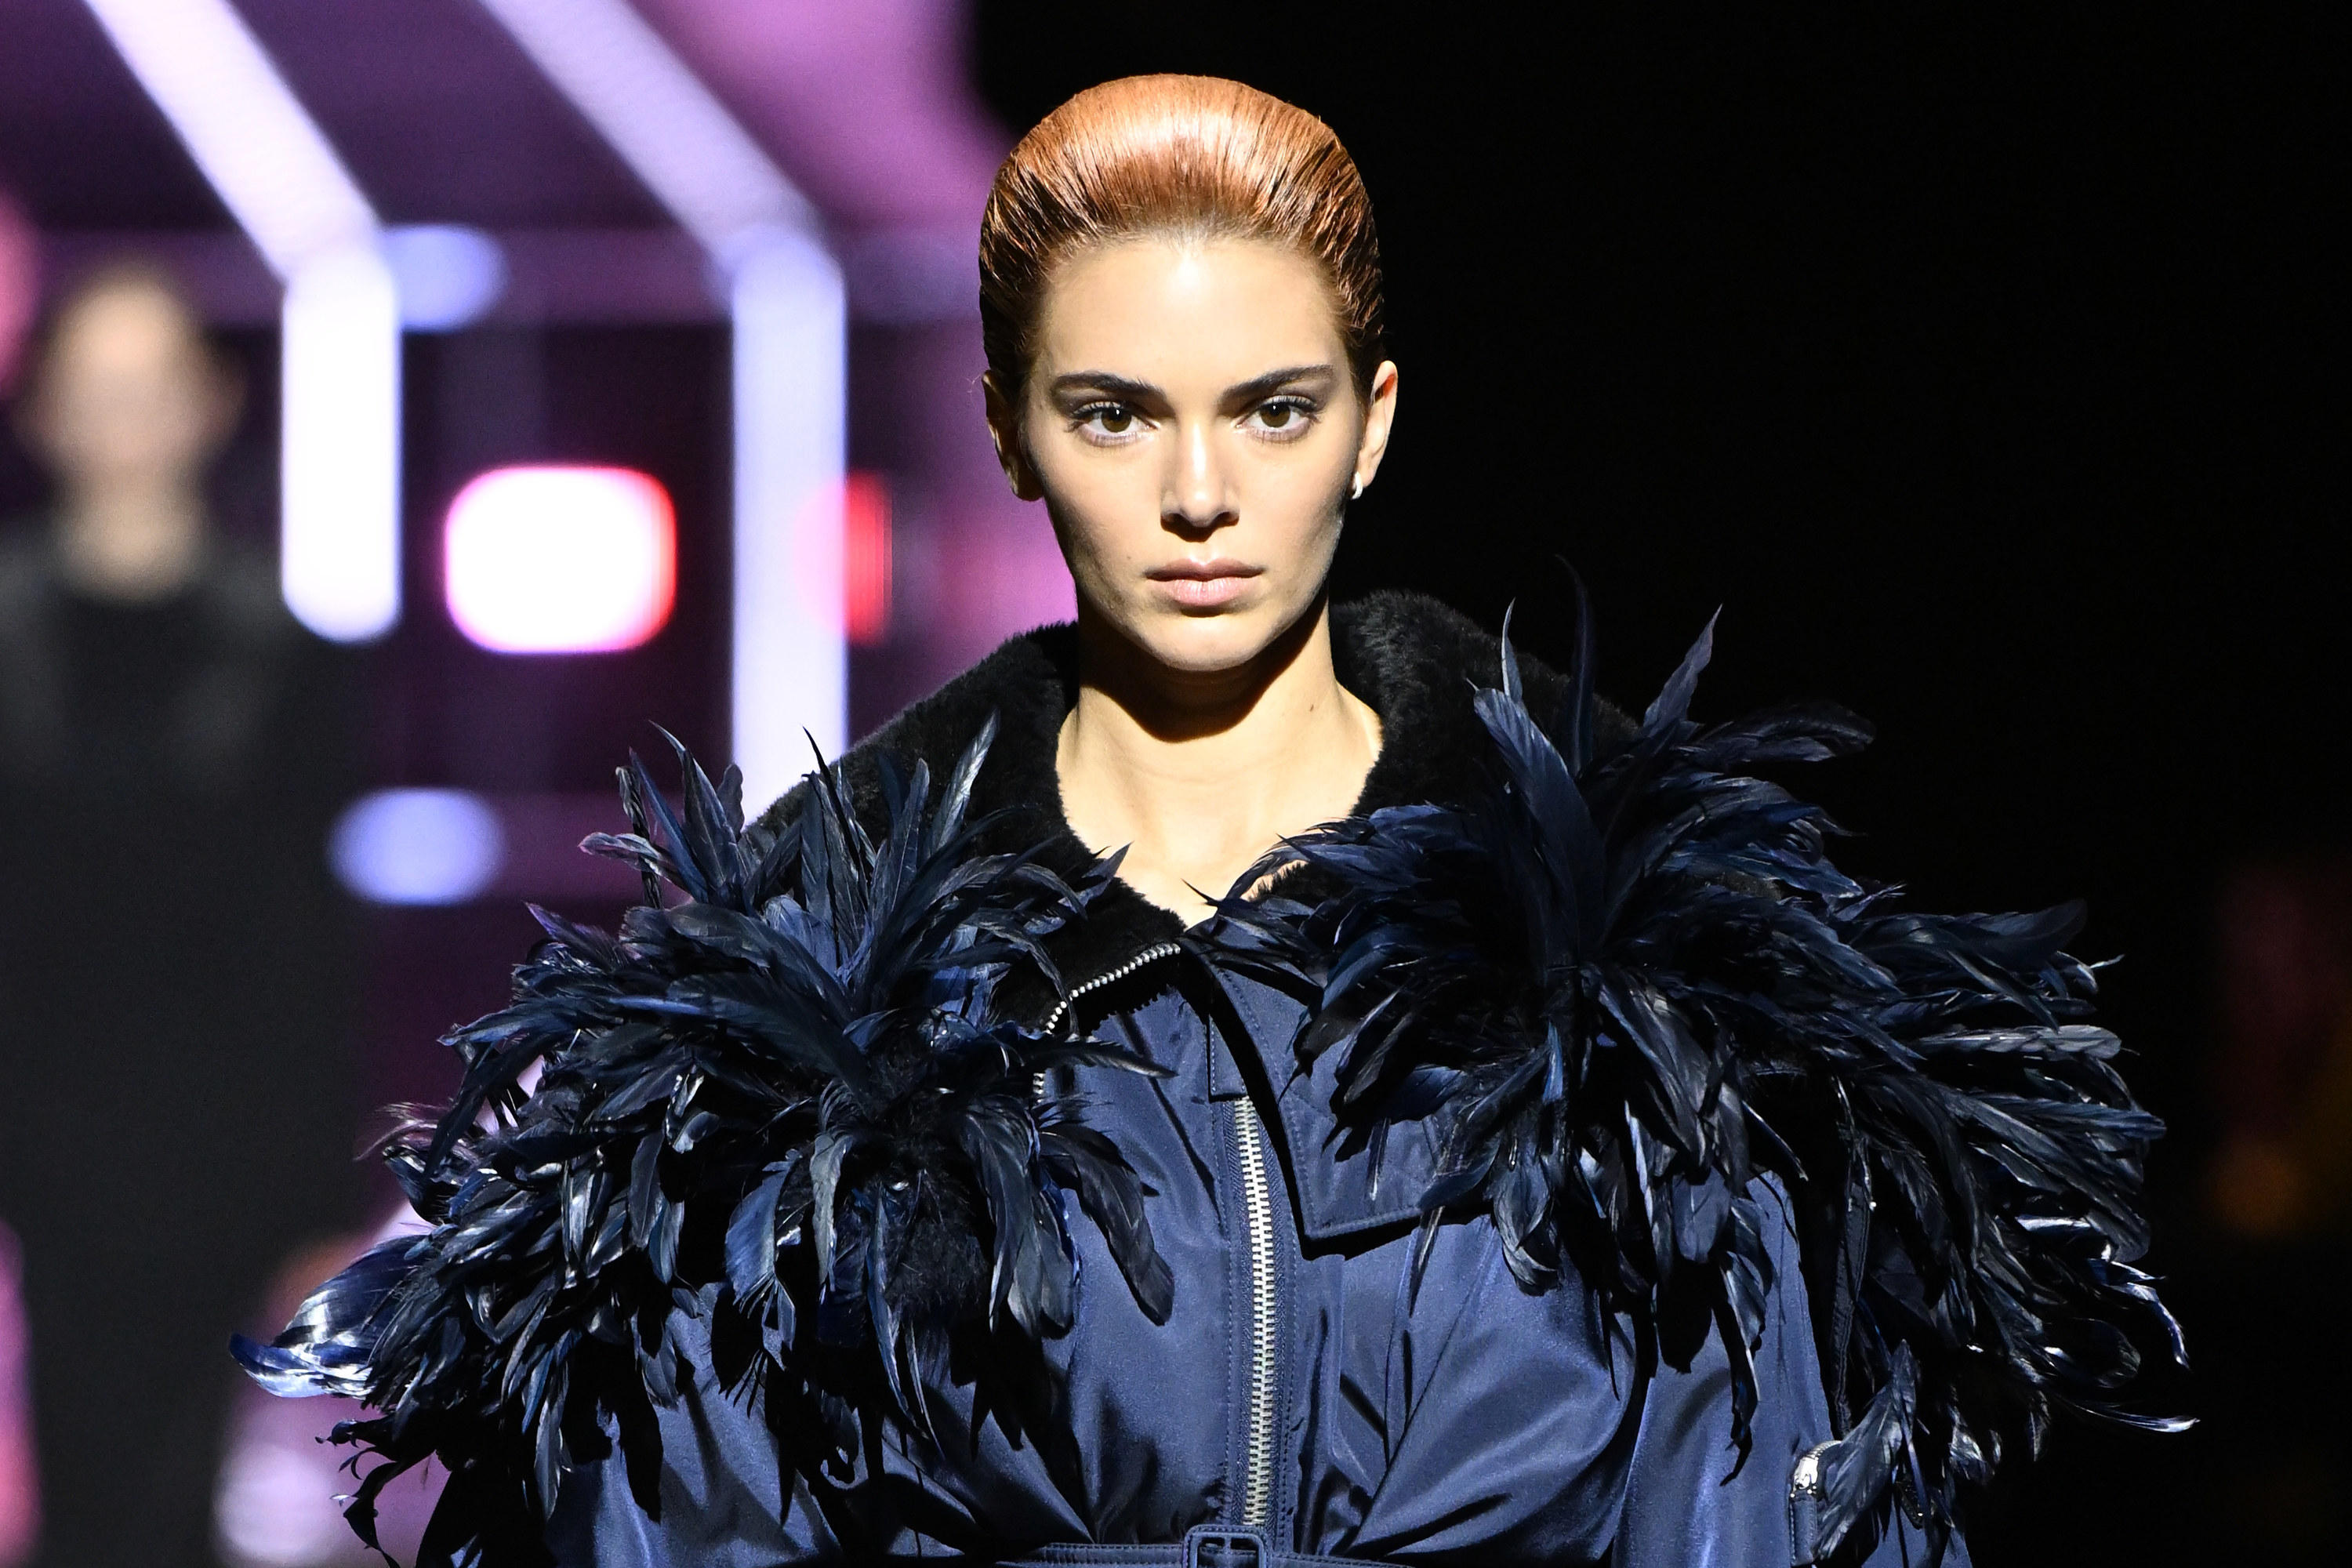 Kendall walks the runway with her red hair pulled back